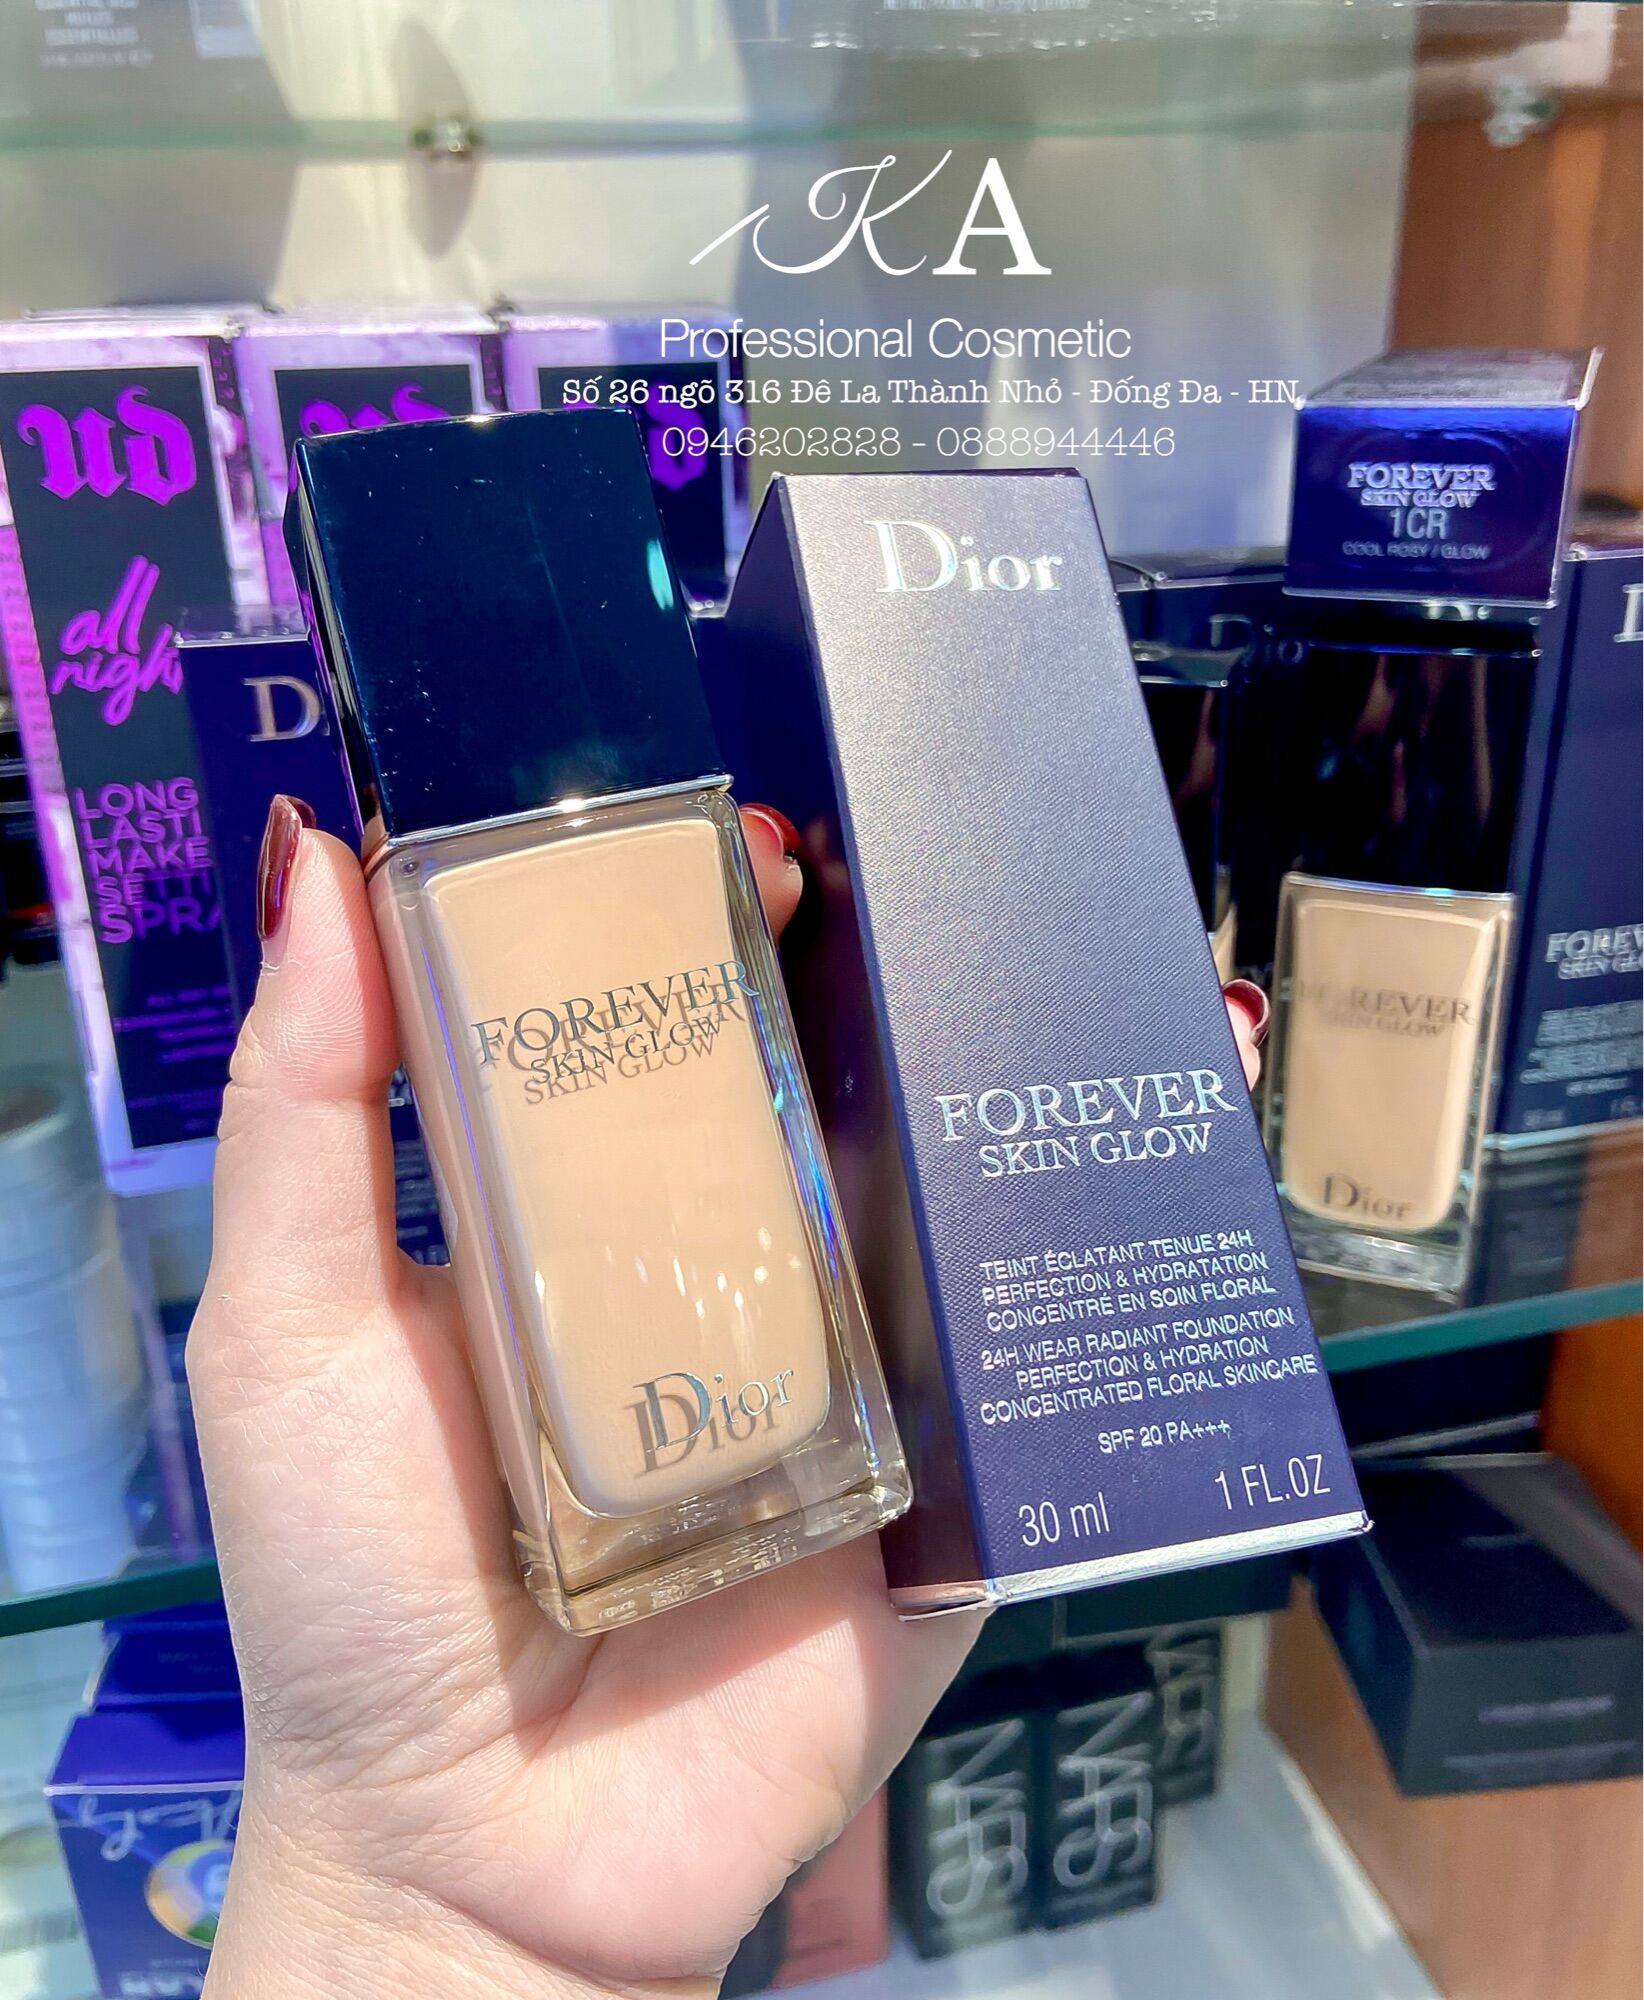 DIOR FOREVER SKIN GLOW FOUNDATION REVIEW AND WEAR TEST  YouTube